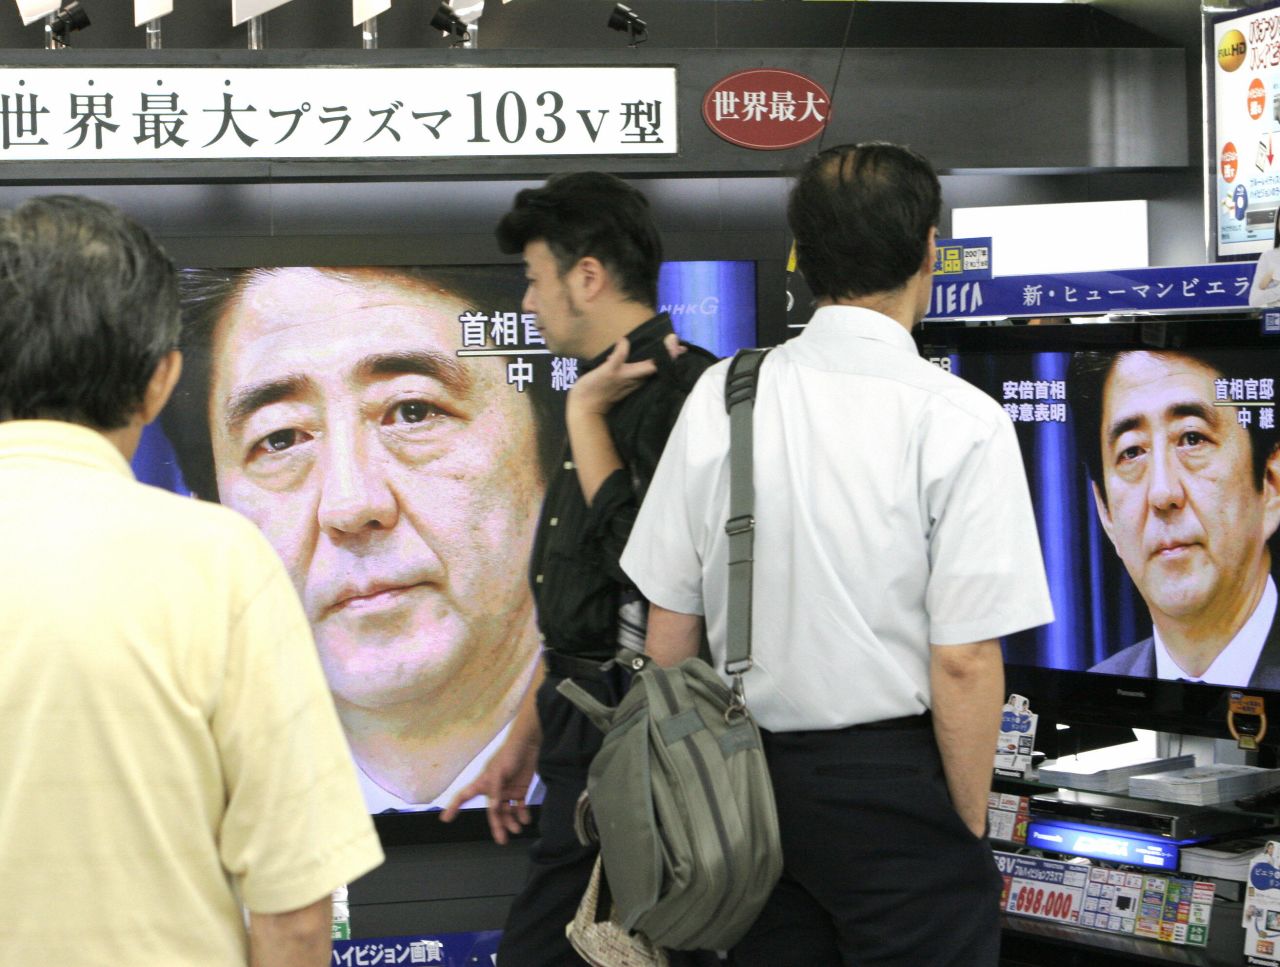 Television screens show Abe as he announces his resignation as prime minister in 2007. He'd been in power for less than a year, but a string of scandals hampered his agenda and sent his approval ratings plummeting.